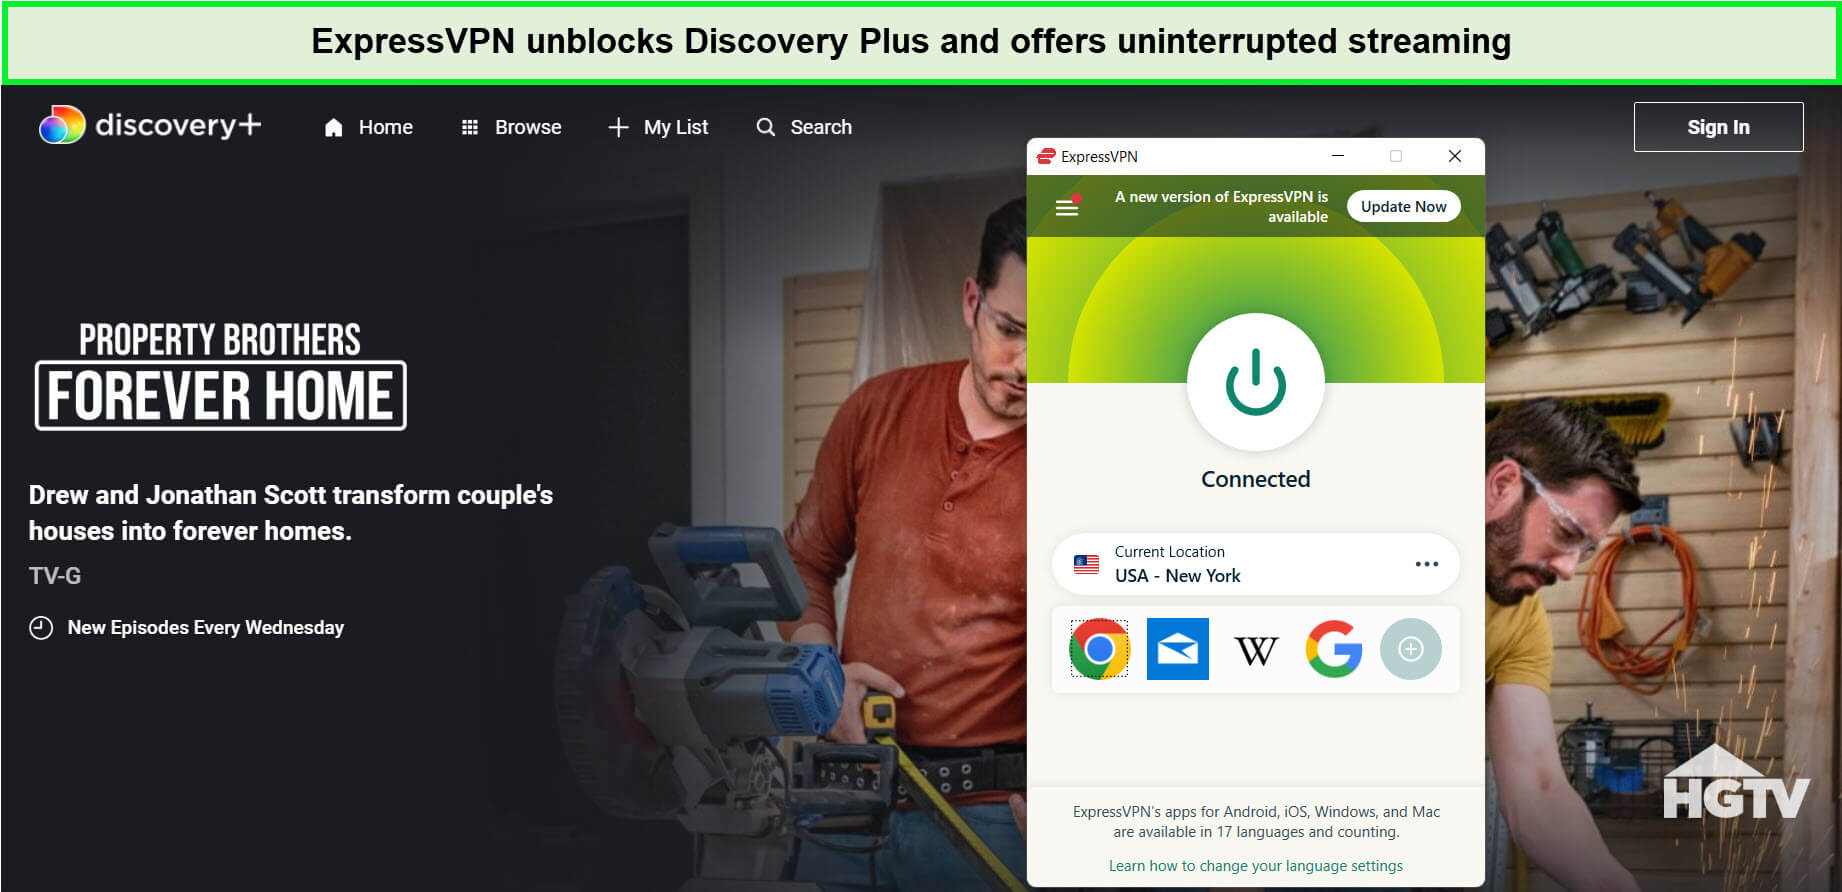 expressvpn-unblocks-property-brothers-forever-home-season-8-on-discovery-plus-in-Spain